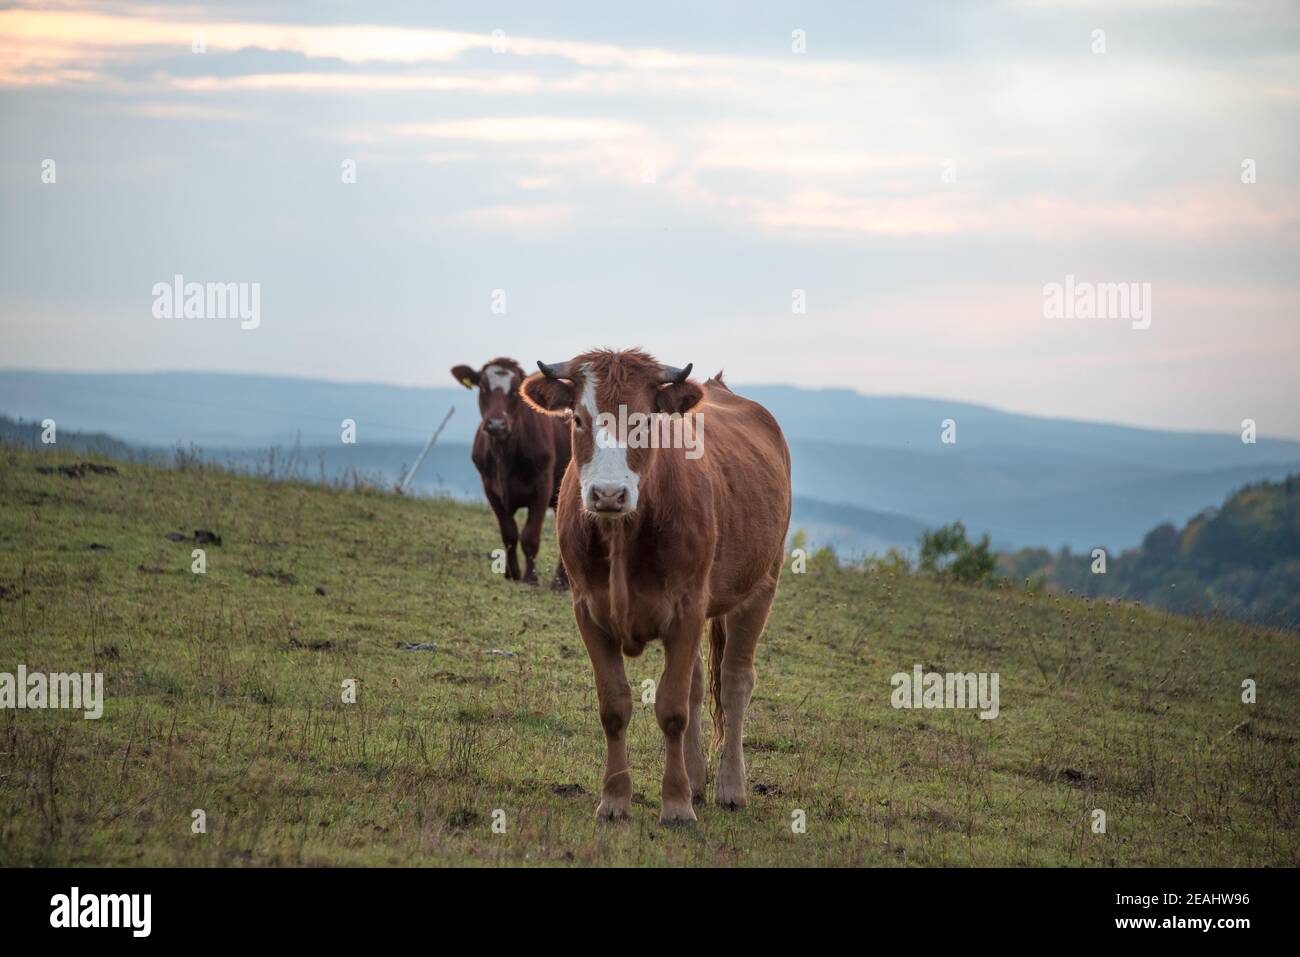 Two cows on a pastry at evening looking into the camera, landscape mode Stock Photo